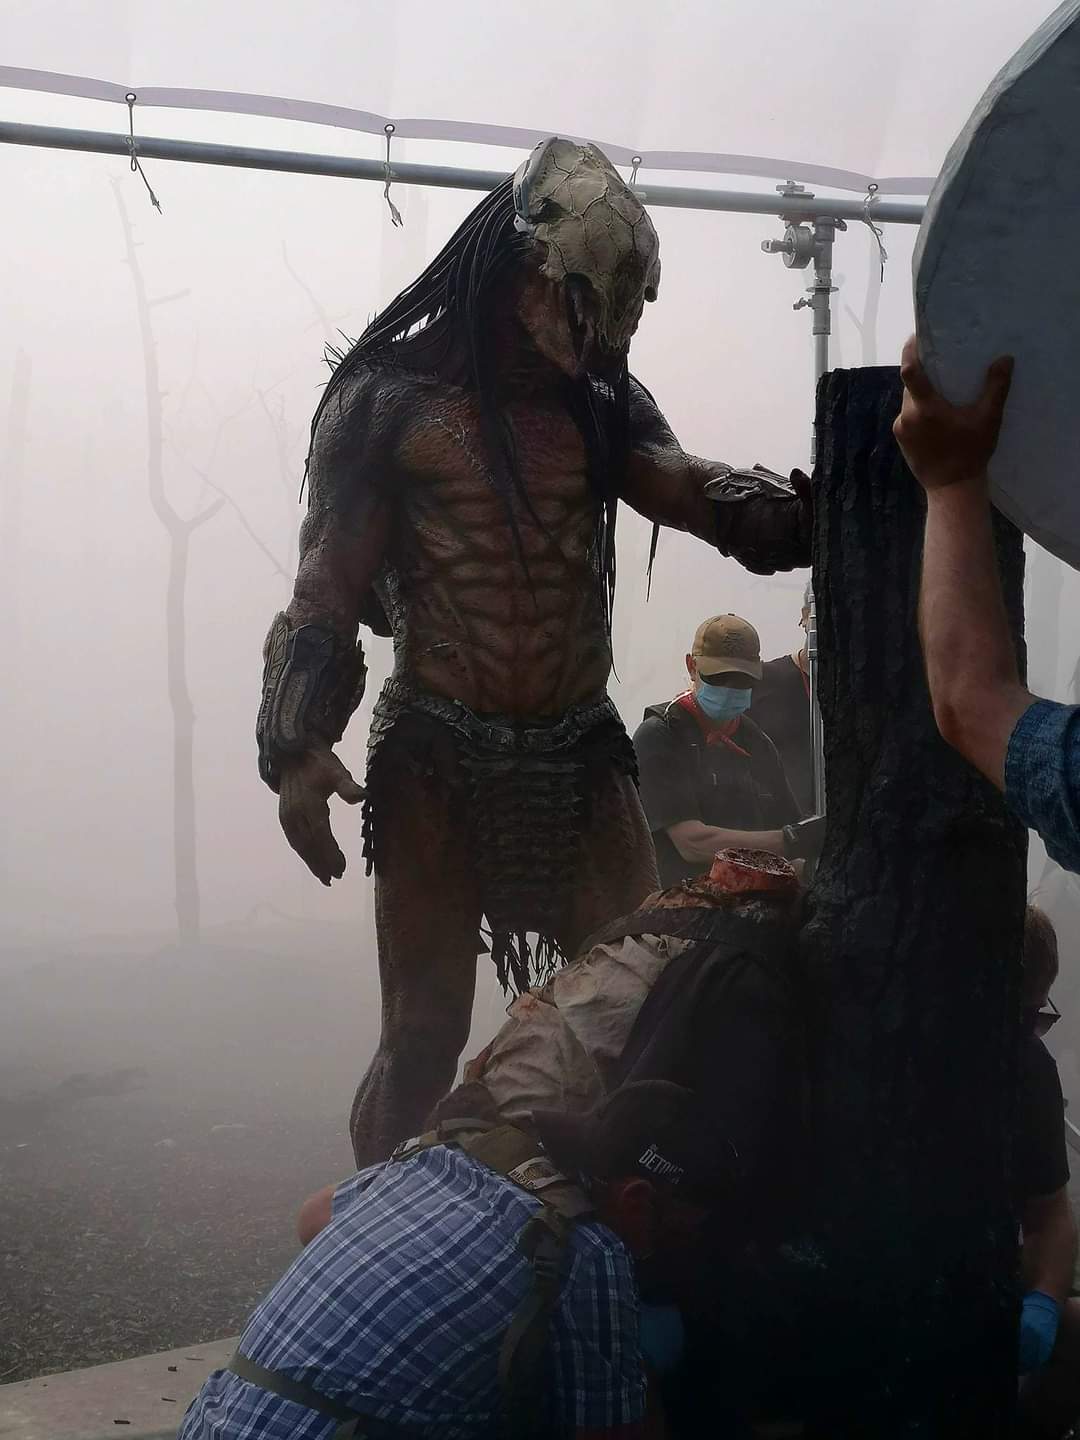 See the Feral Predator up close in new behind the scenes Prey set photos!